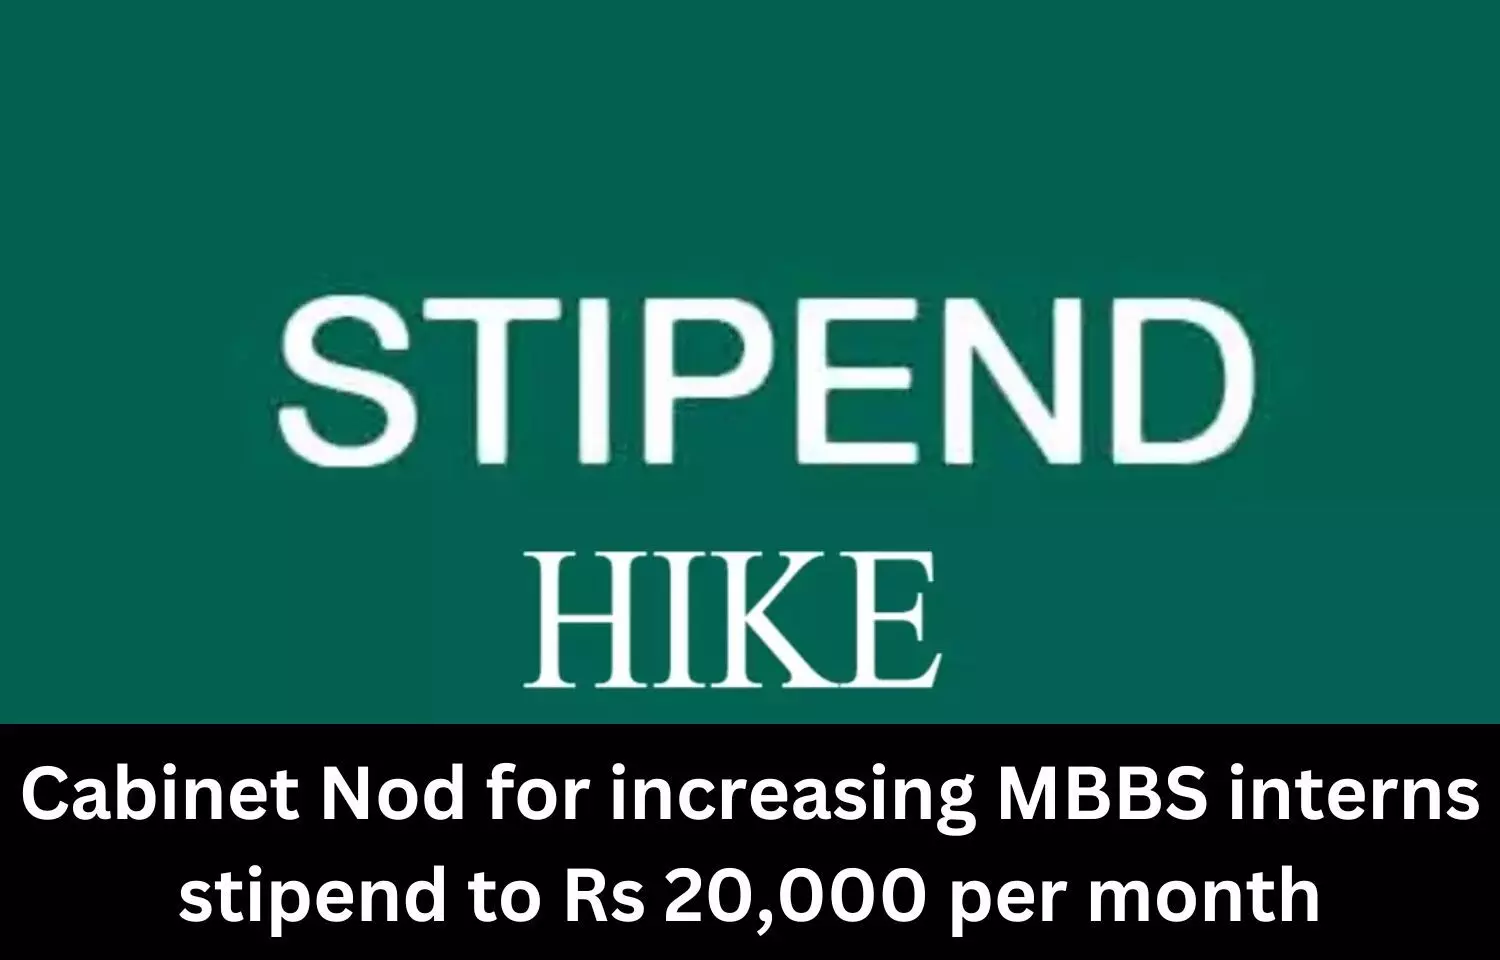 Relief to Bihar MBBS interns: Cabinet approval for increasing stipend to Rs 20,000 per month